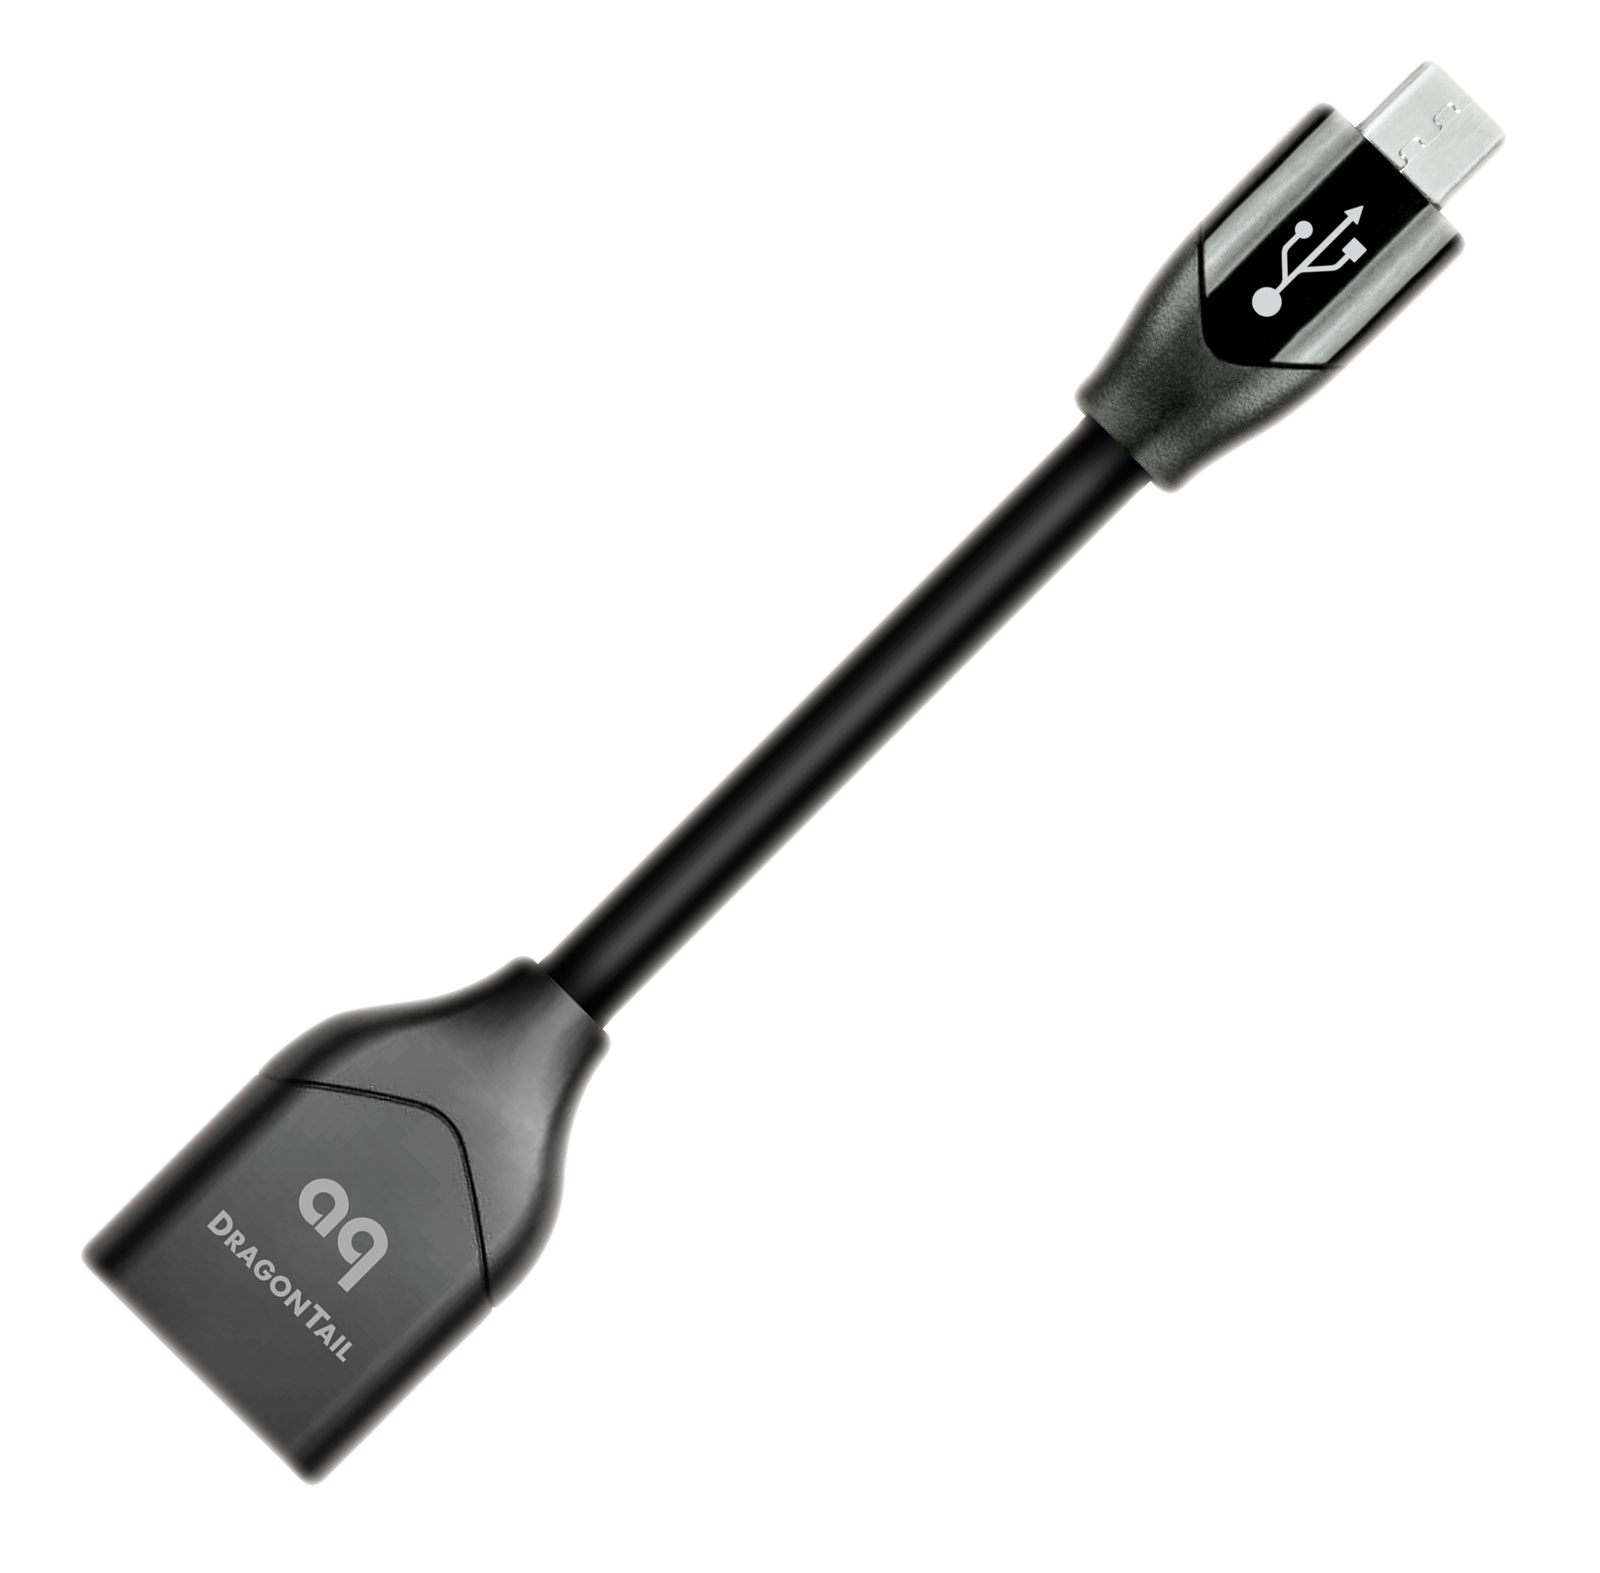 Audioquest DragonTail USB Adaptor For Android™ Devices